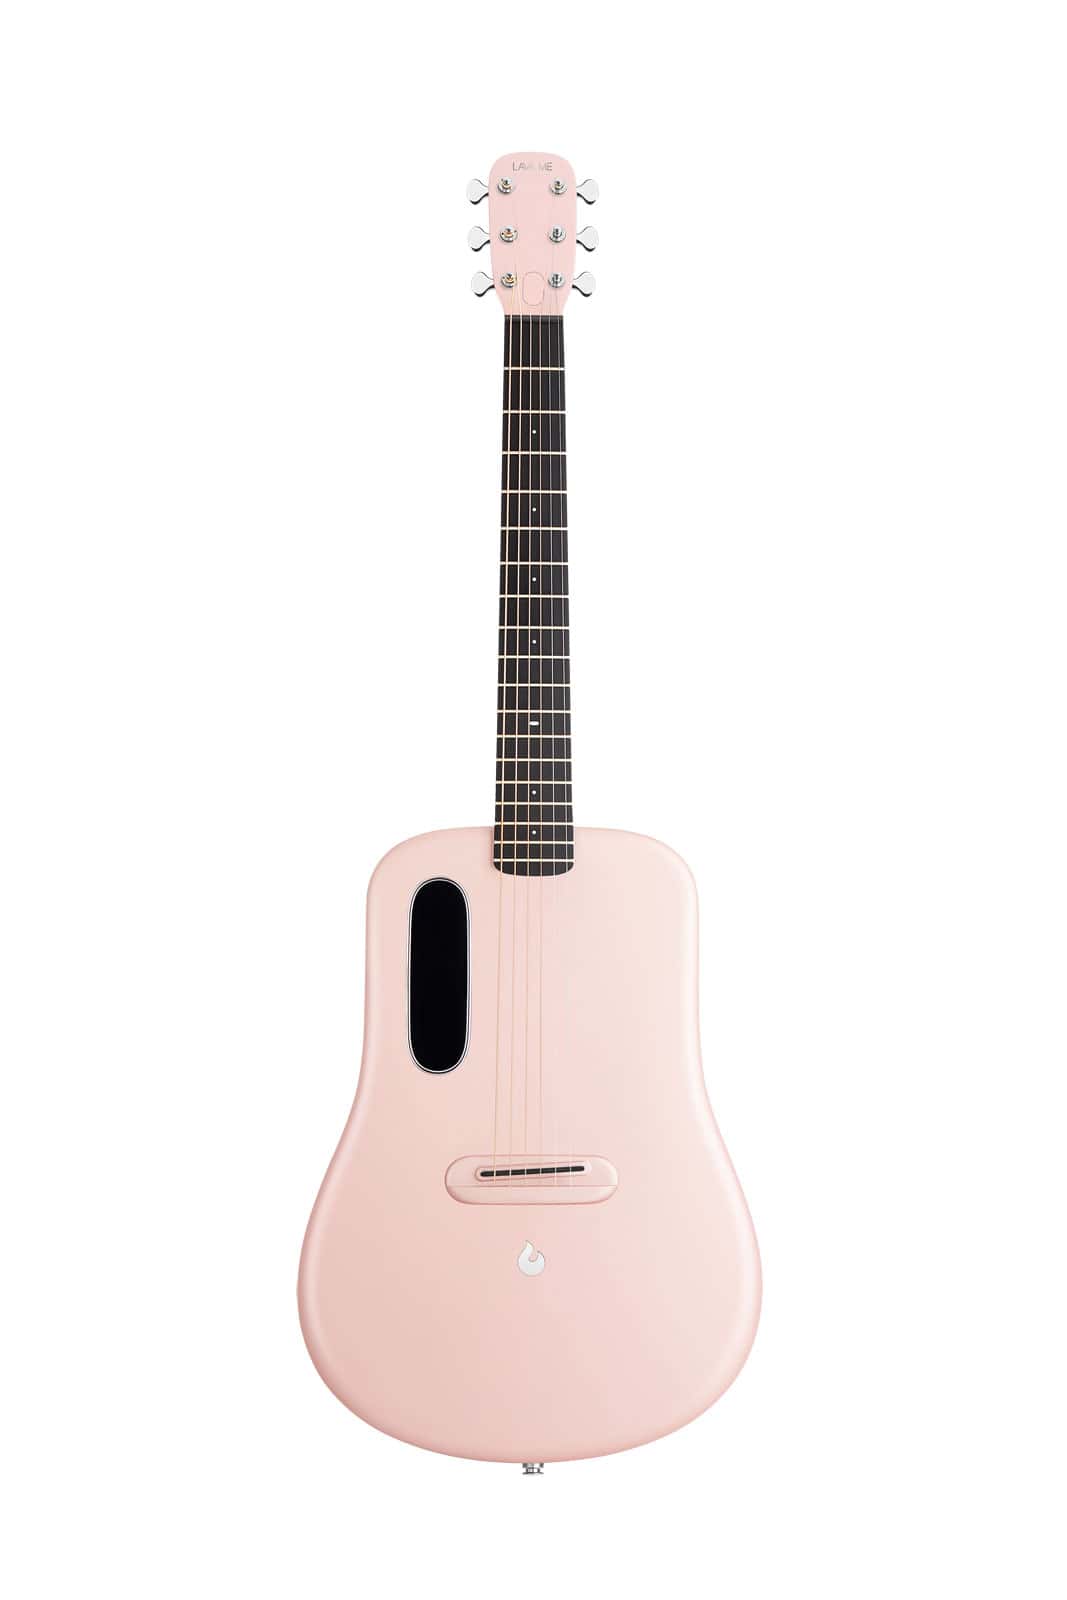 LAVA MUSIC LAVA ME 4 CARBON SERIES 38'' PINK - WITH SPACE BAG